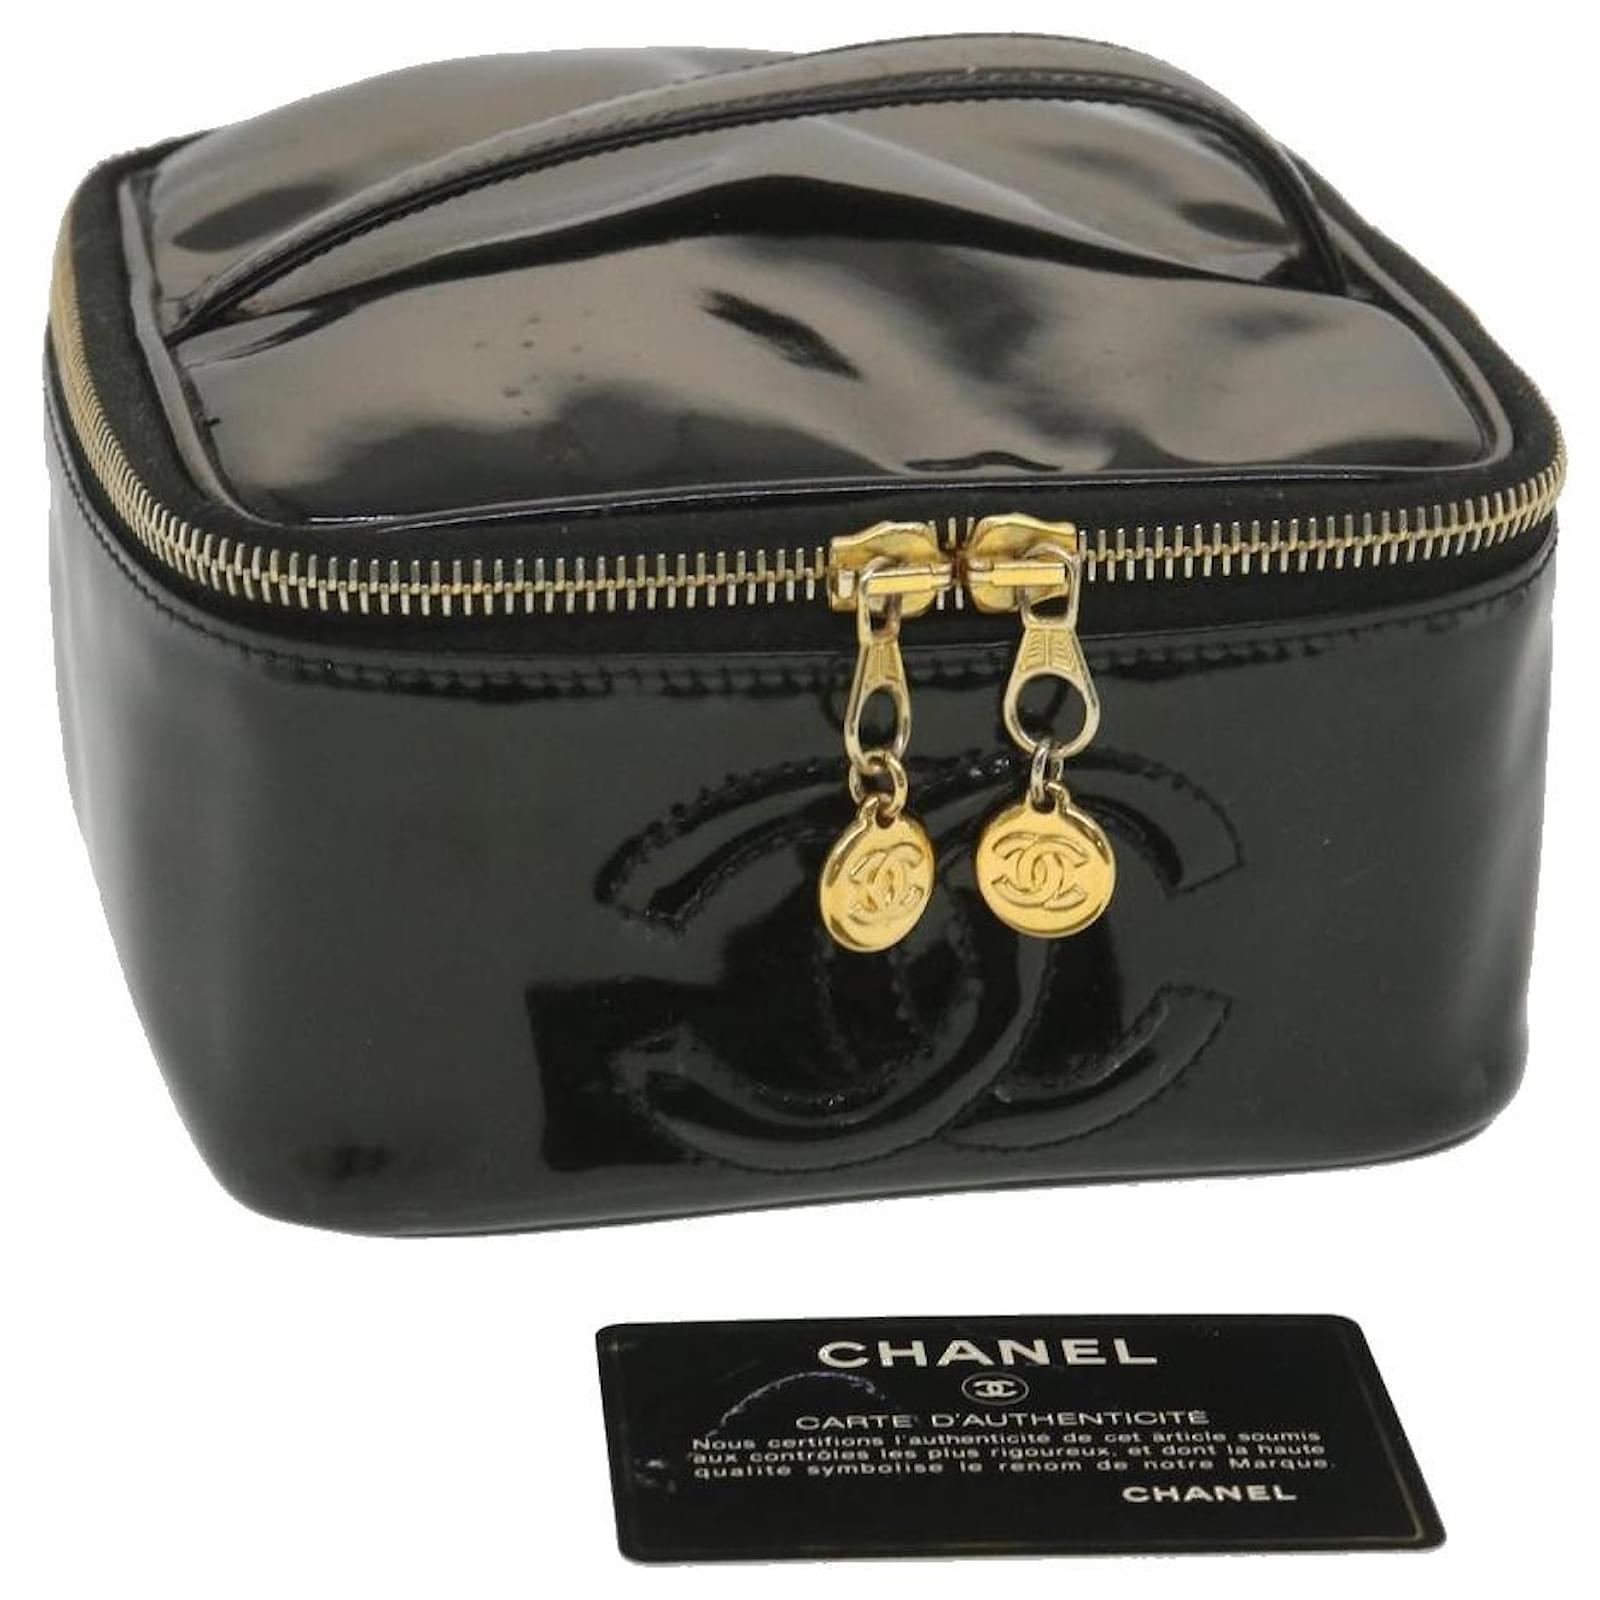 CHANEL Vanity Cosmetic Pouch Patent leather Black CC Auth bs4603